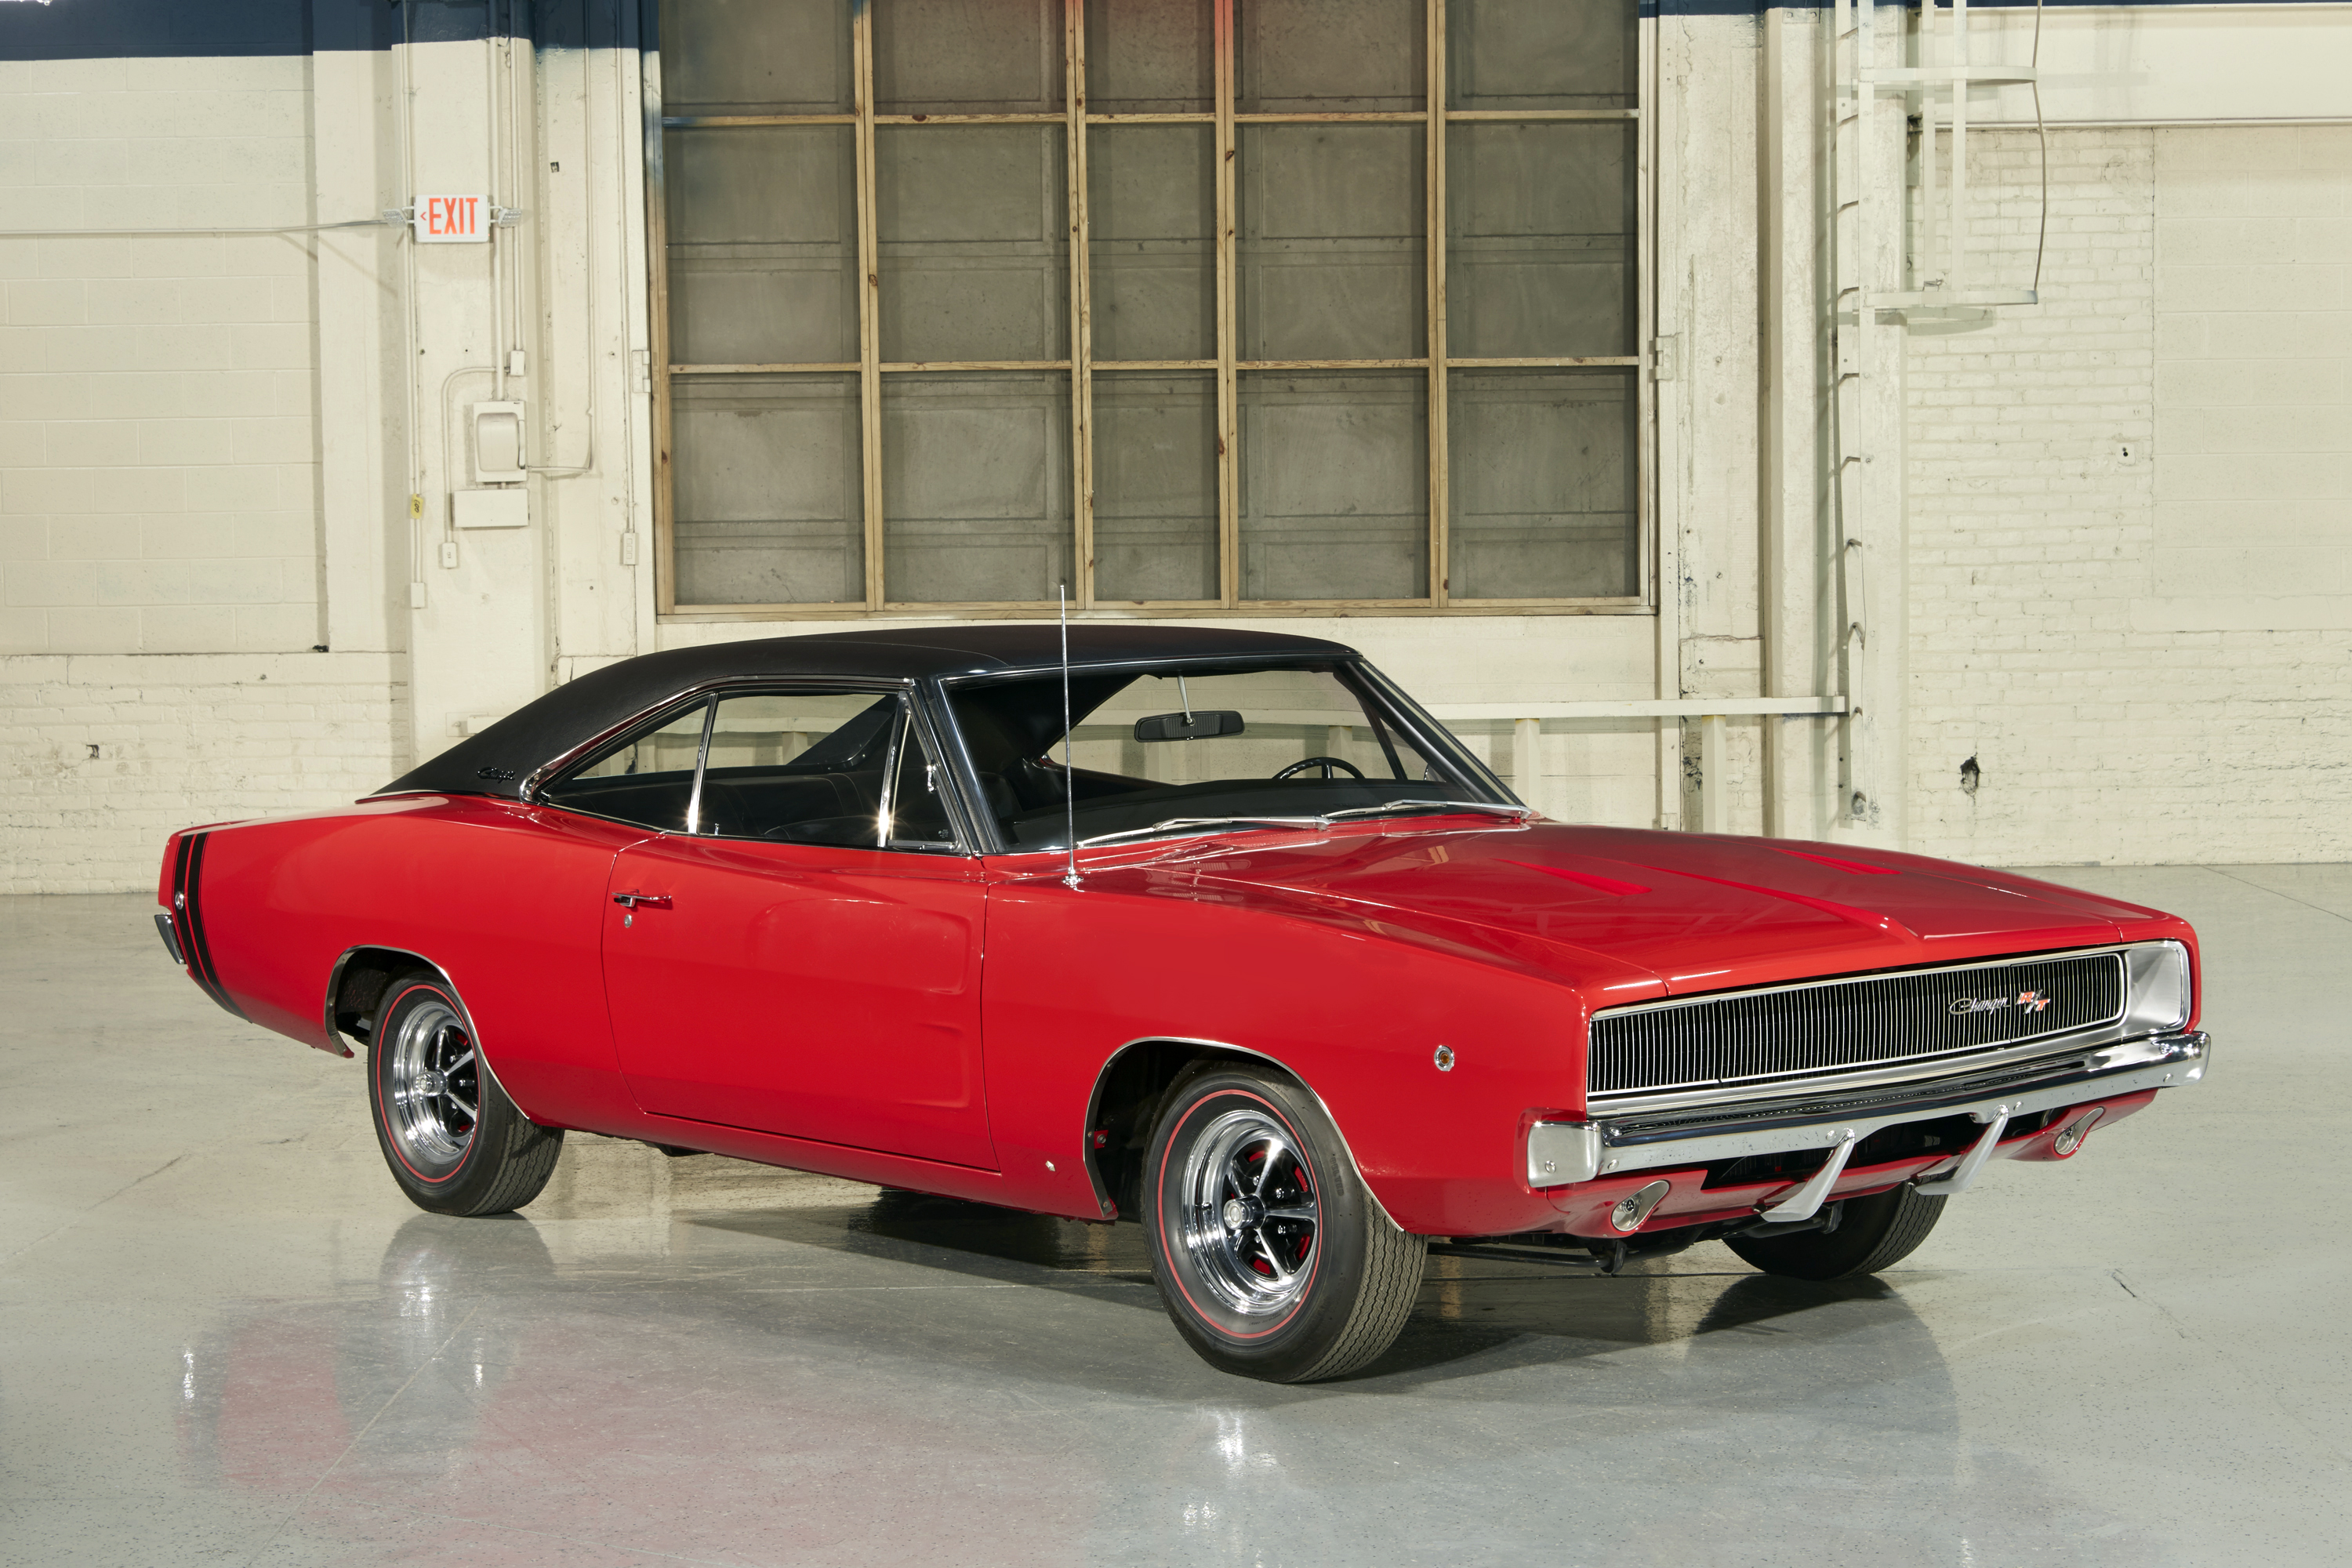 vehicles, dodge charger rt, car, dodge charger, dodge, muscle car